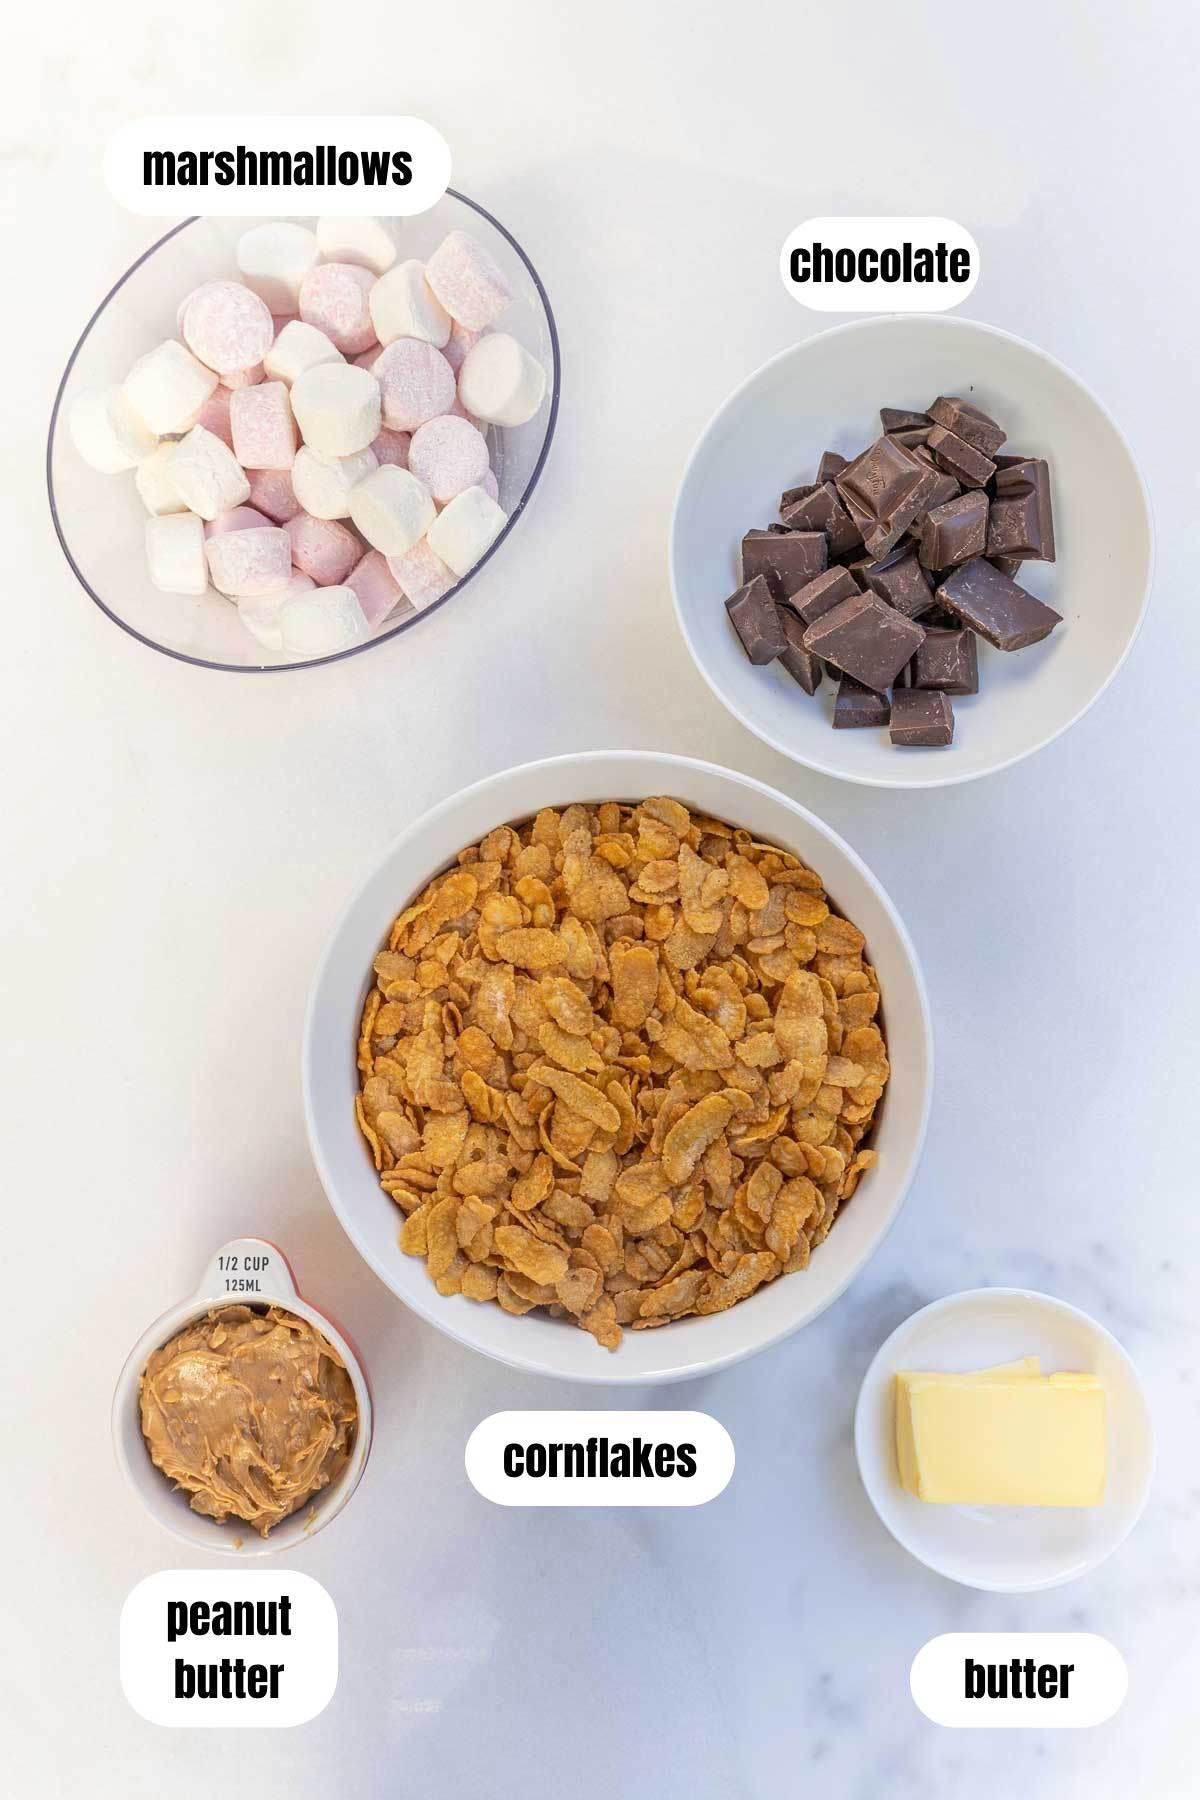 A collage of all the ingredients needed to make a 5-ingredient peanut butter cornflake bar recipe including cornflakes, peanut butter, marshmallows, butter, chocolate and marshmallows.